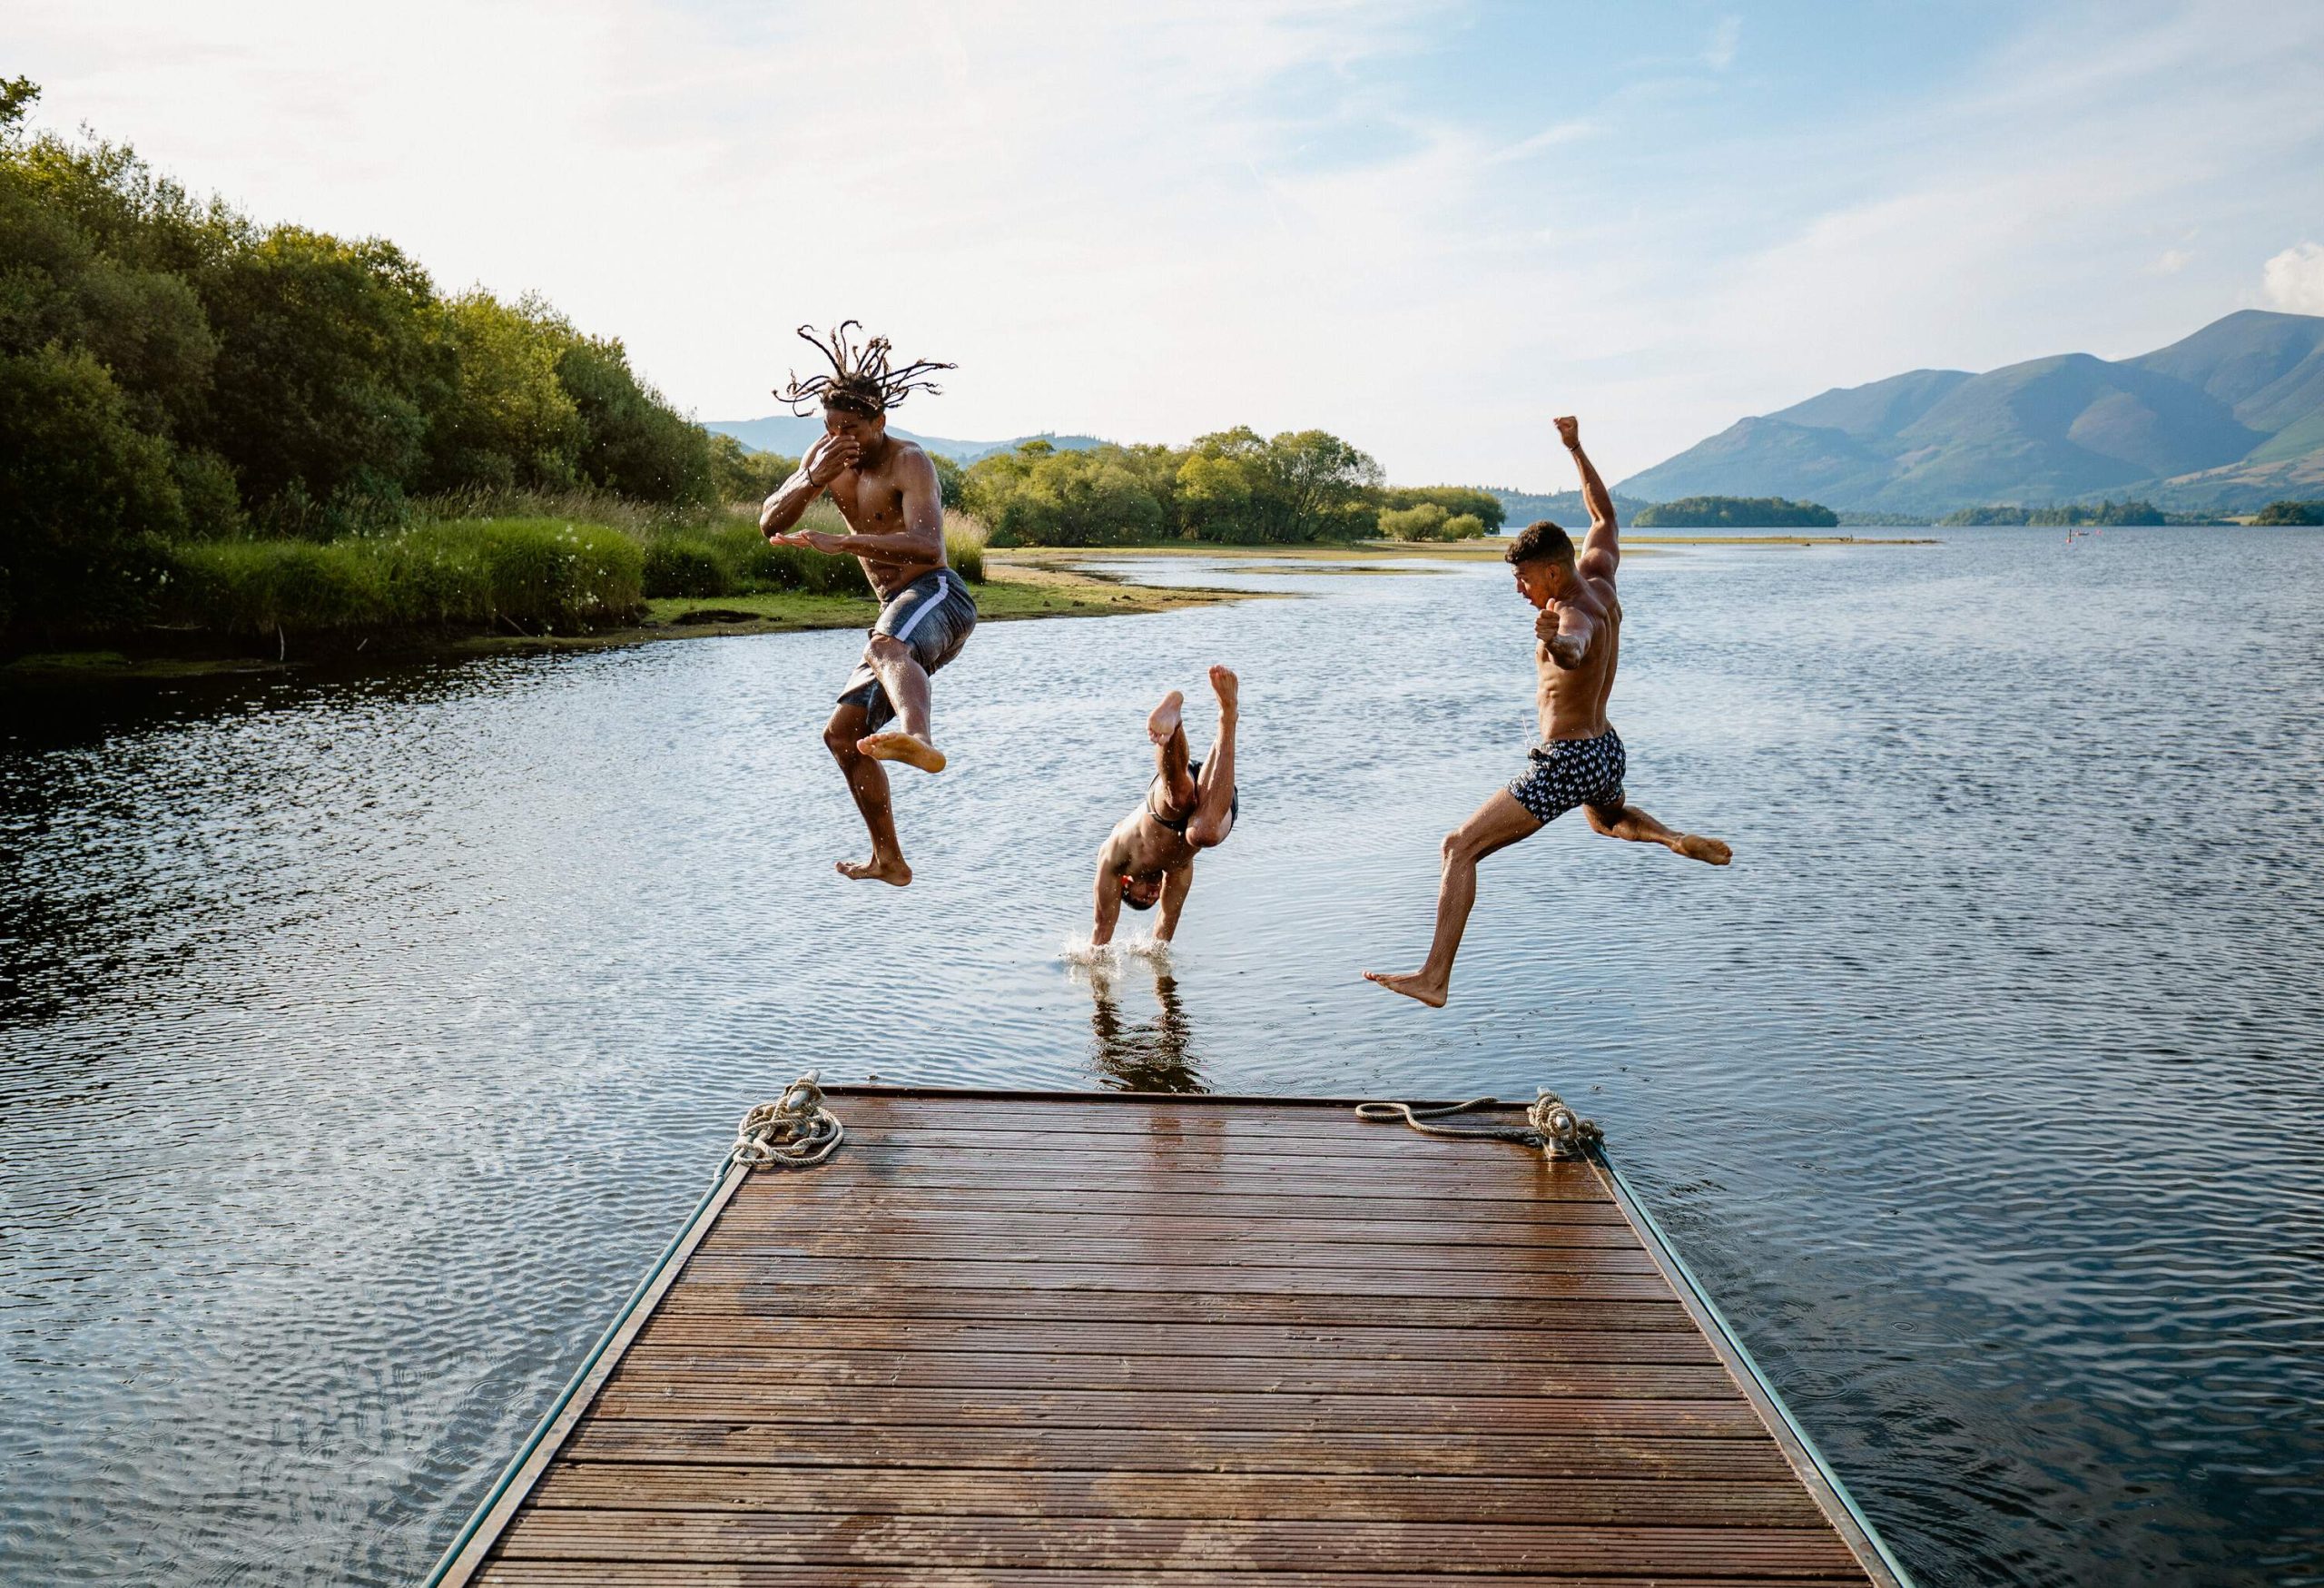 Three people jump into a lake from a jetty.